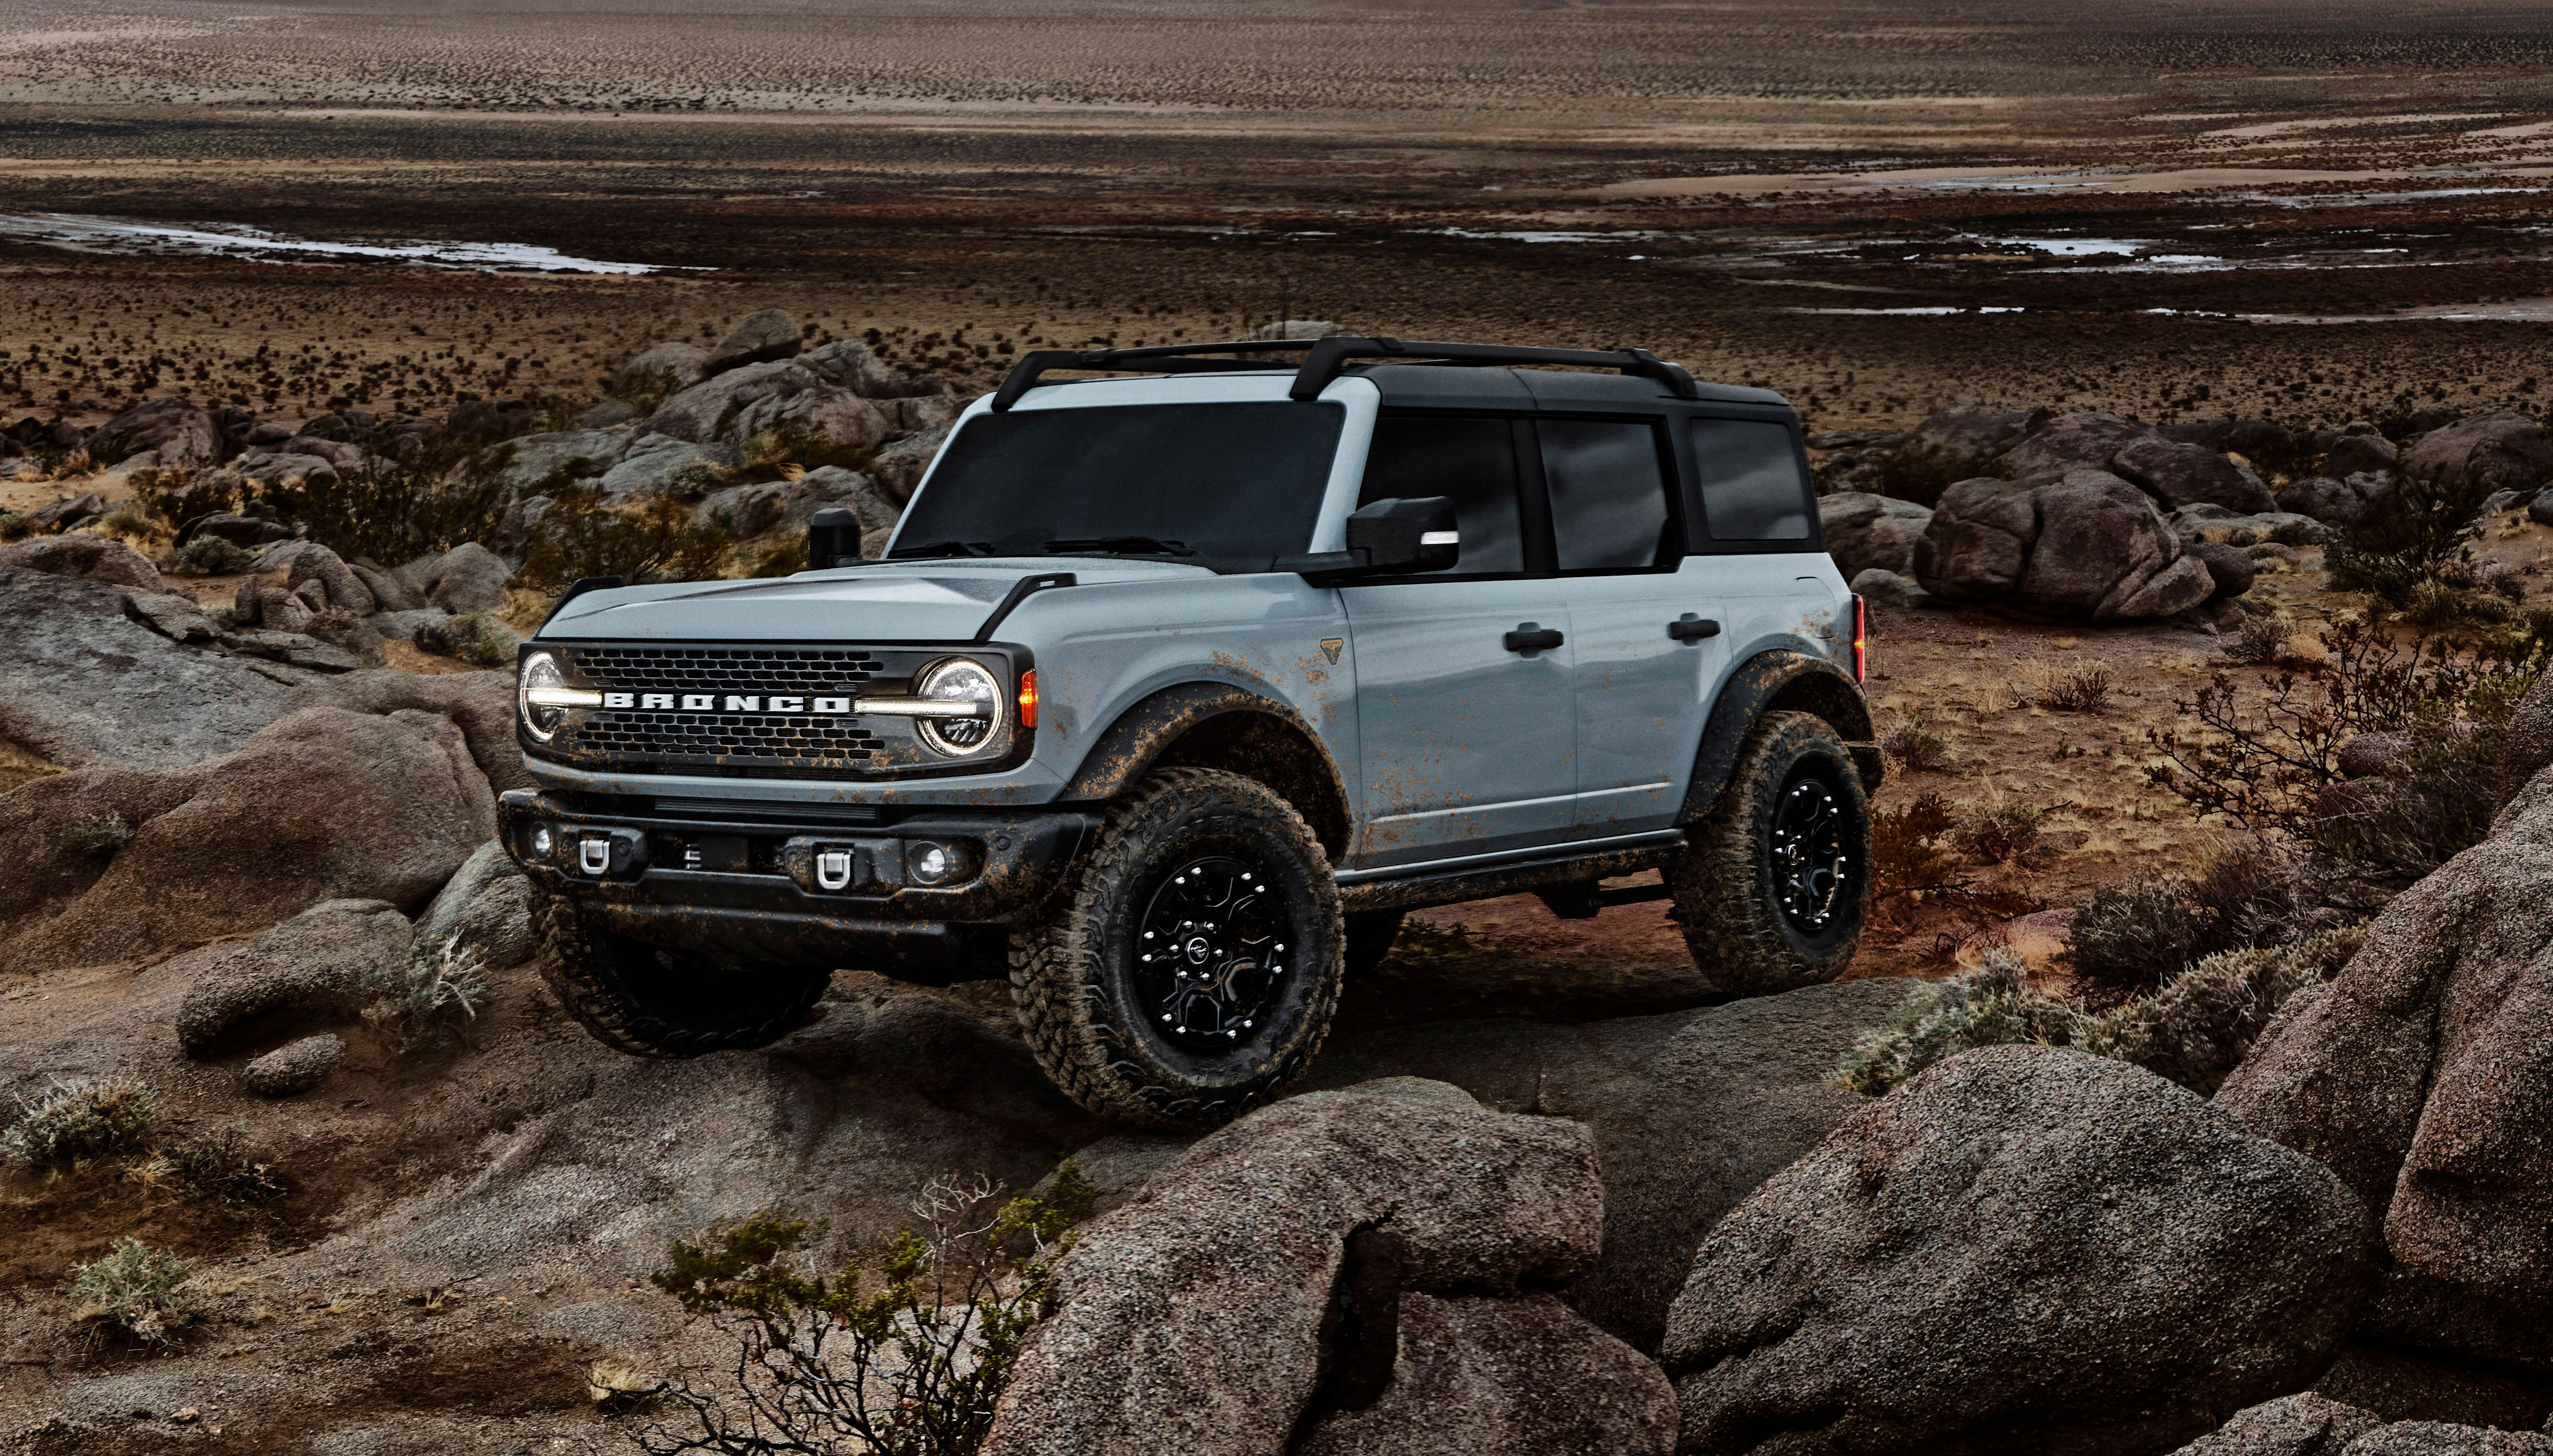 Pre-production 2021 Bronco four-door Badlands Series with available Sasquatch™ Terrain Package in Cactus Grey, Johnson Valley, California.